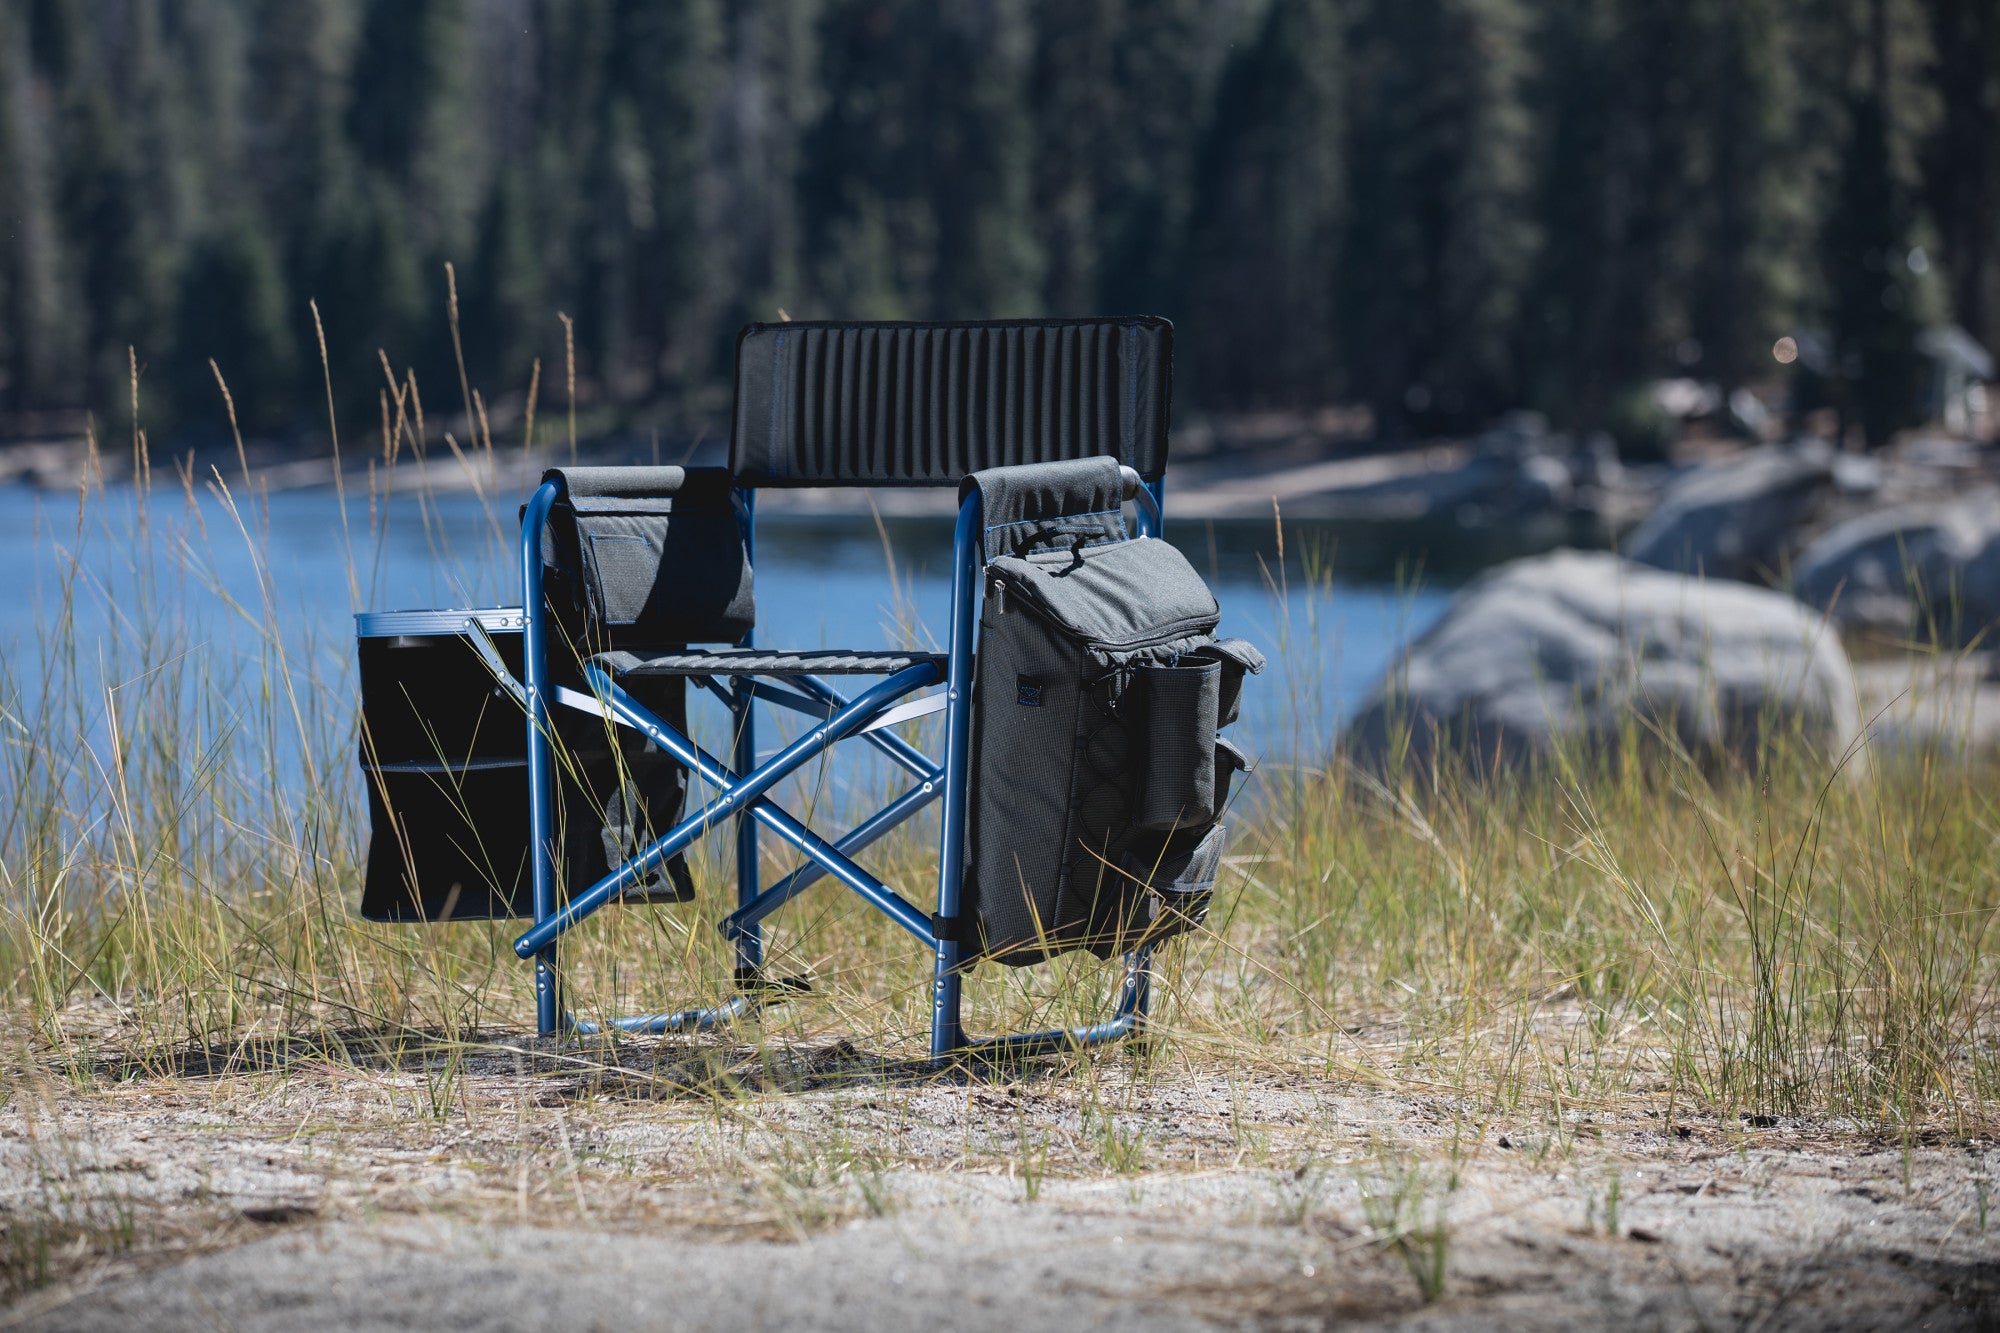 Los Angeles Dodgers - Fusion Camping Chair